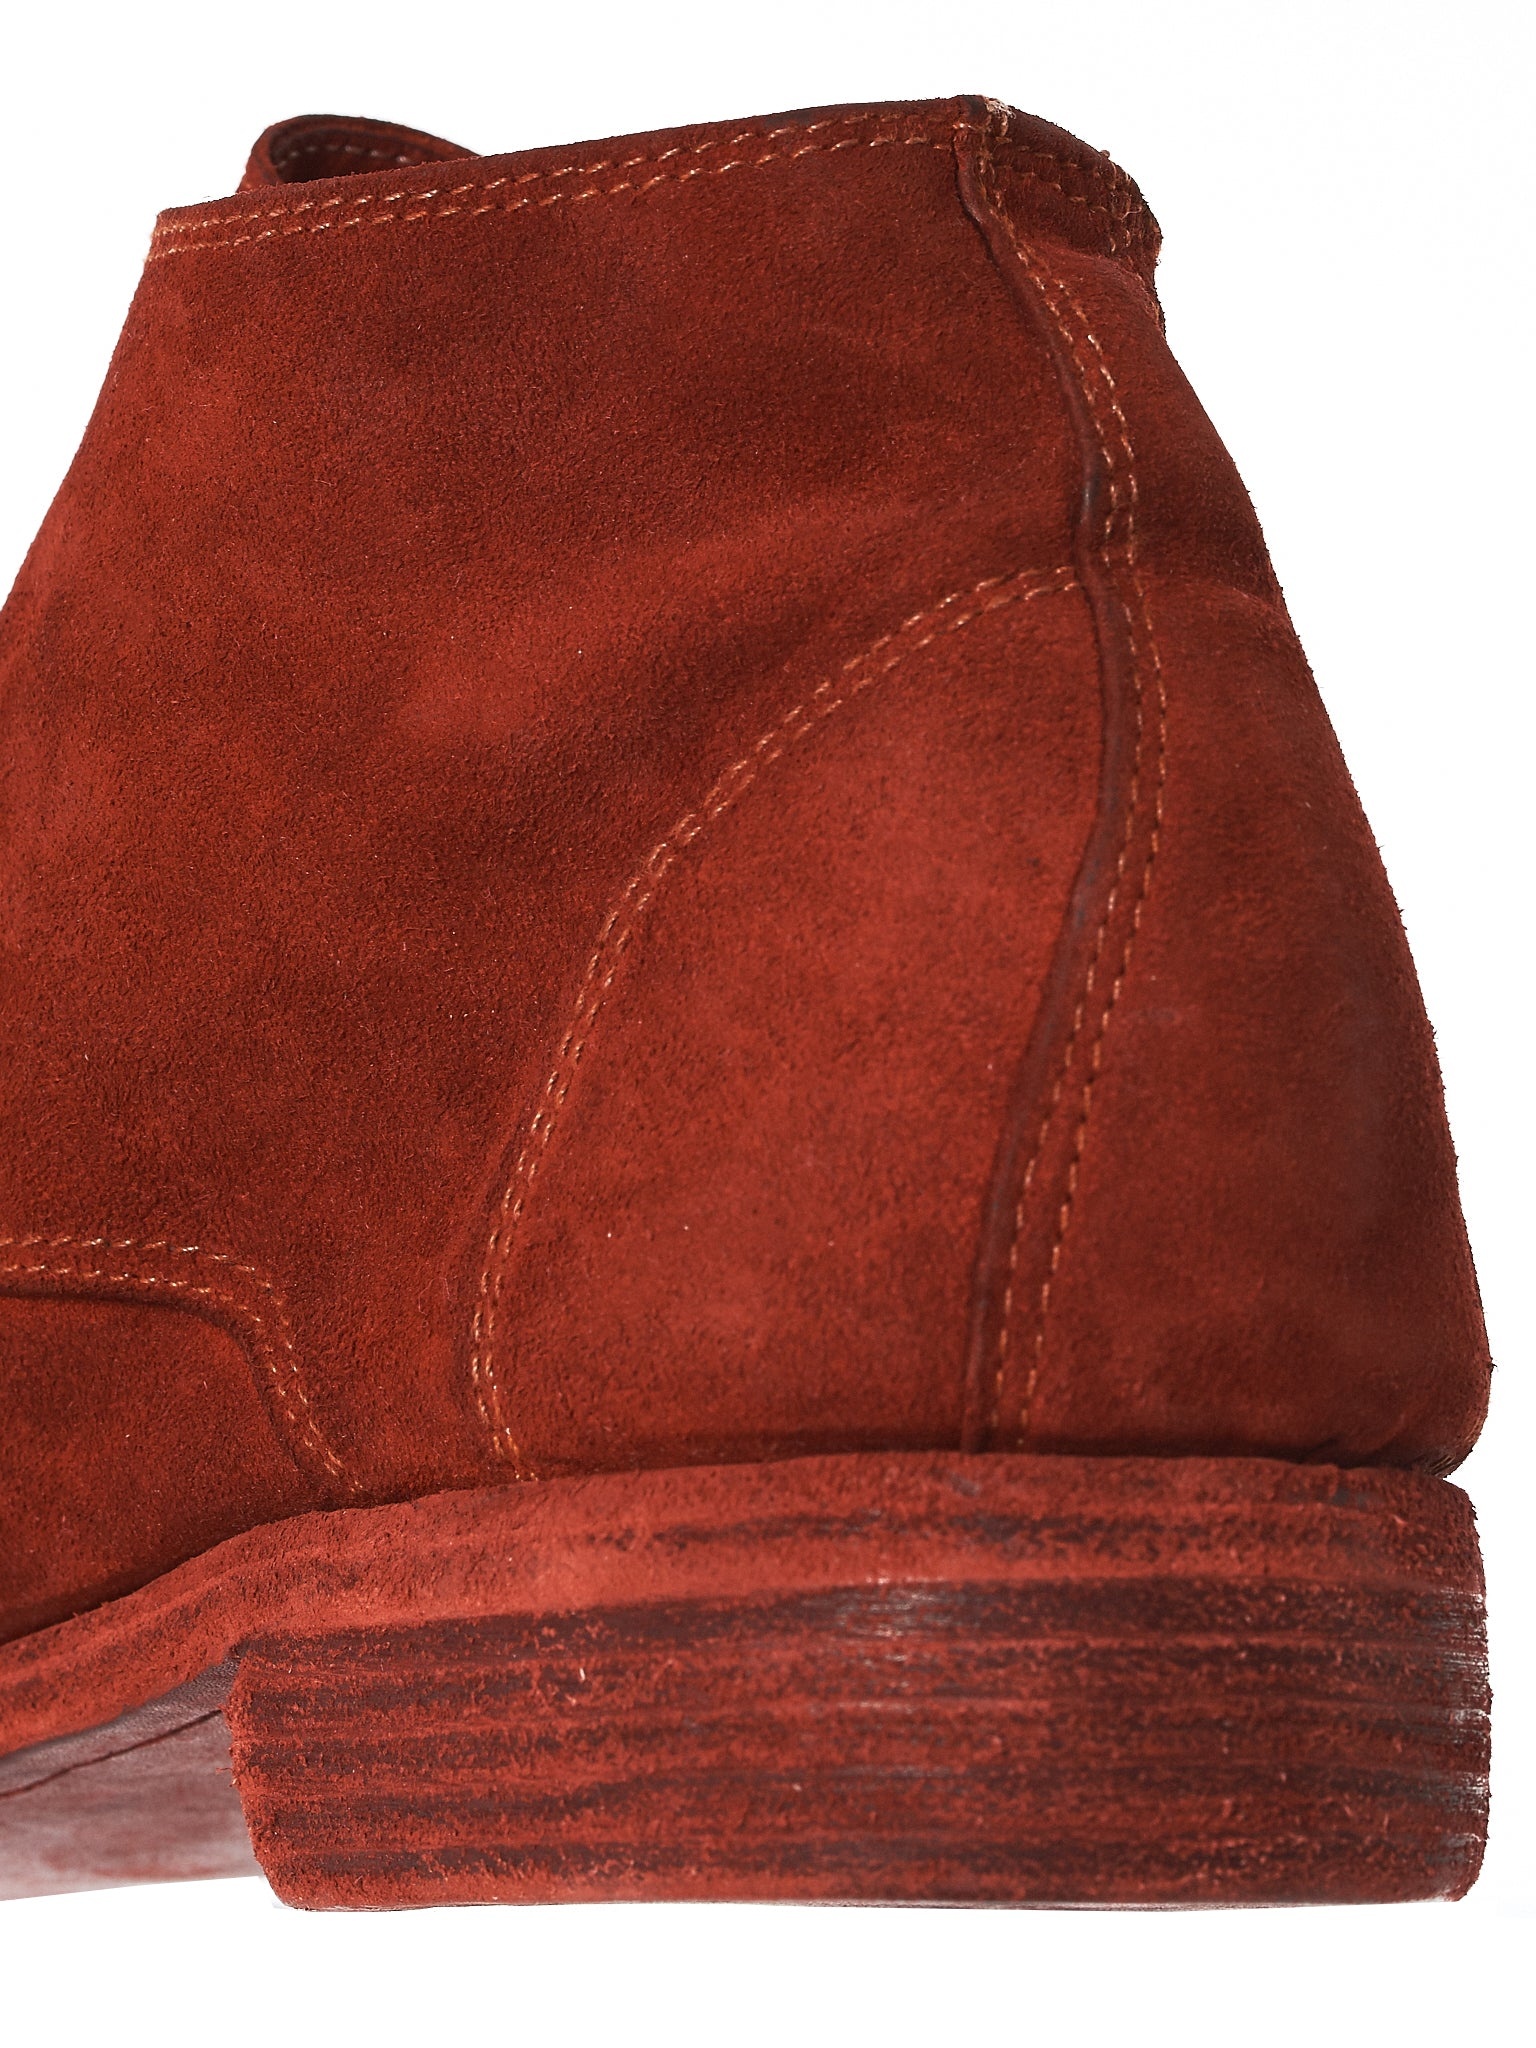 Suede Dyed Leather Boots - 4